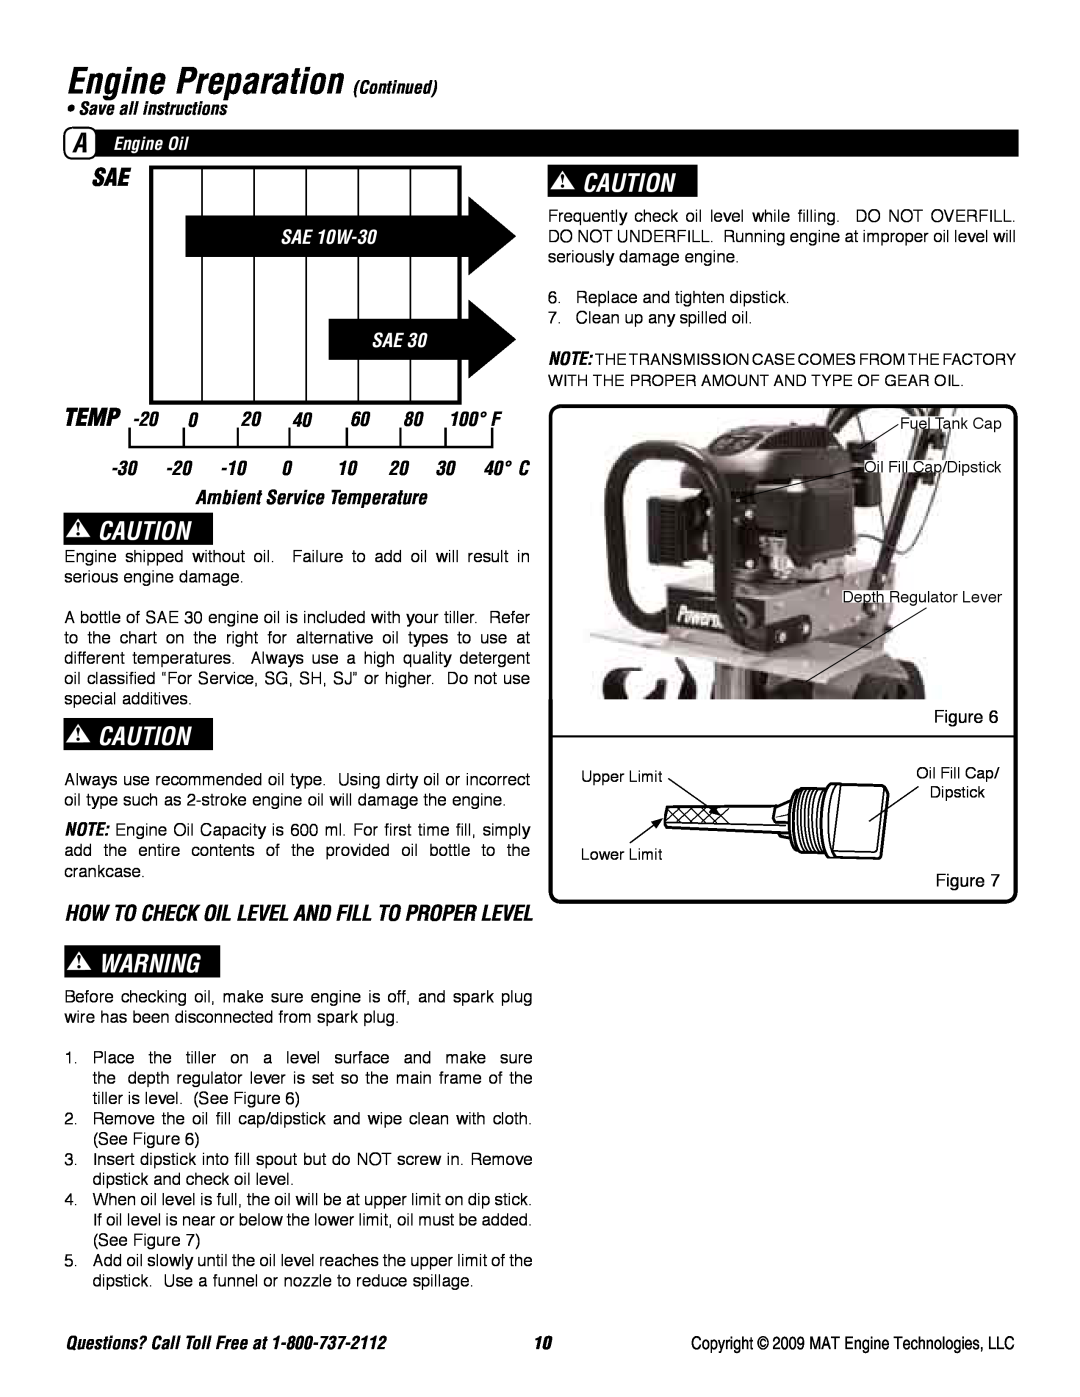 Powermate P-FTT-160MD Engine Preparation Continued, Temp, SAE 10W-30, 100 F, 30 40 C, Save all instructions, A Engine Oil 